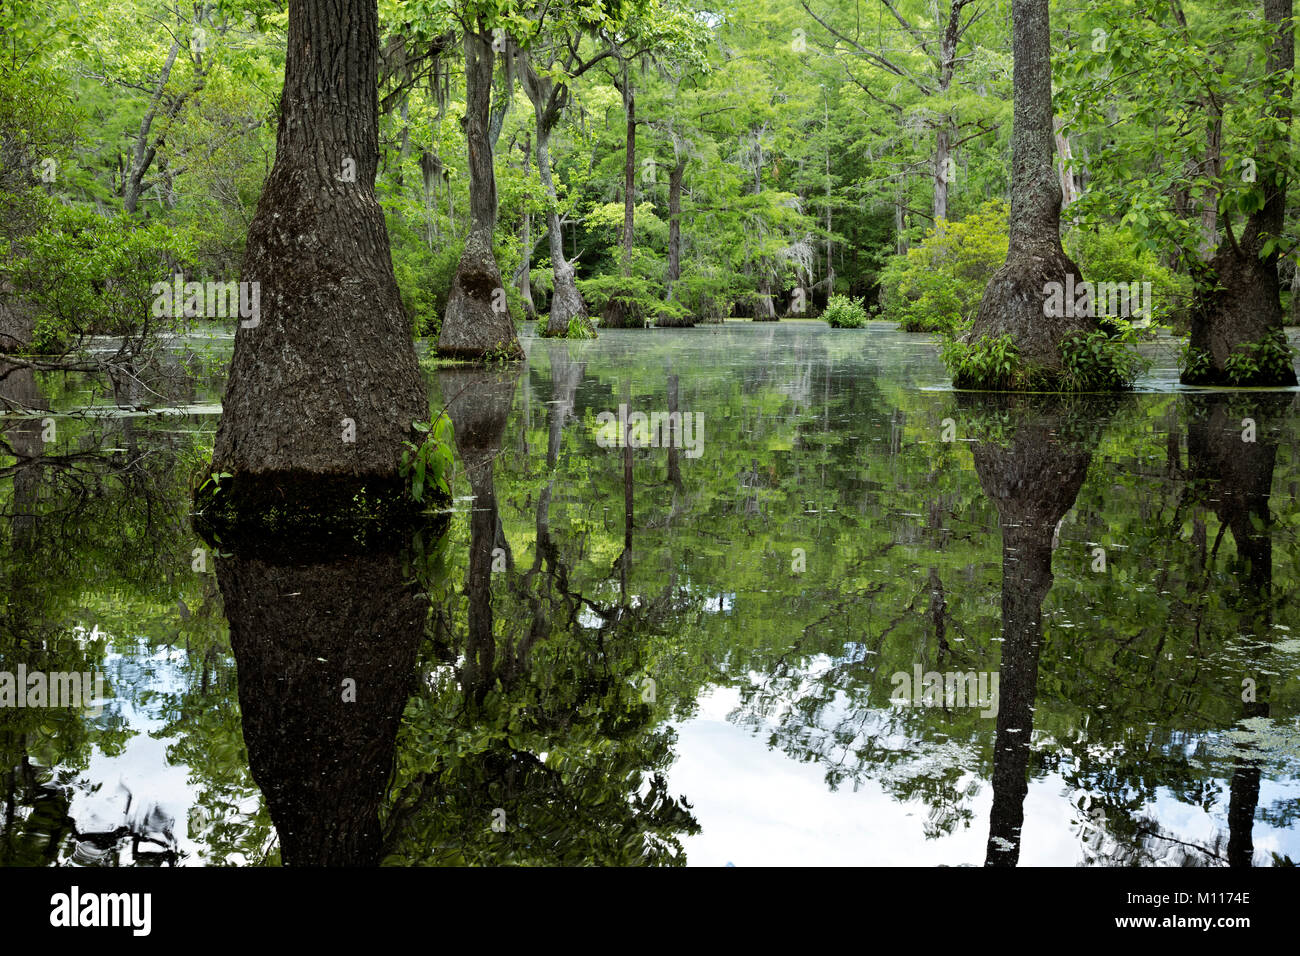 NORTH CAROLINA - Graceful trees rising out of the cypress swamp reflecting in the still waters of Merchant Millpond in Merchant Millpond State Park. Stock Photo